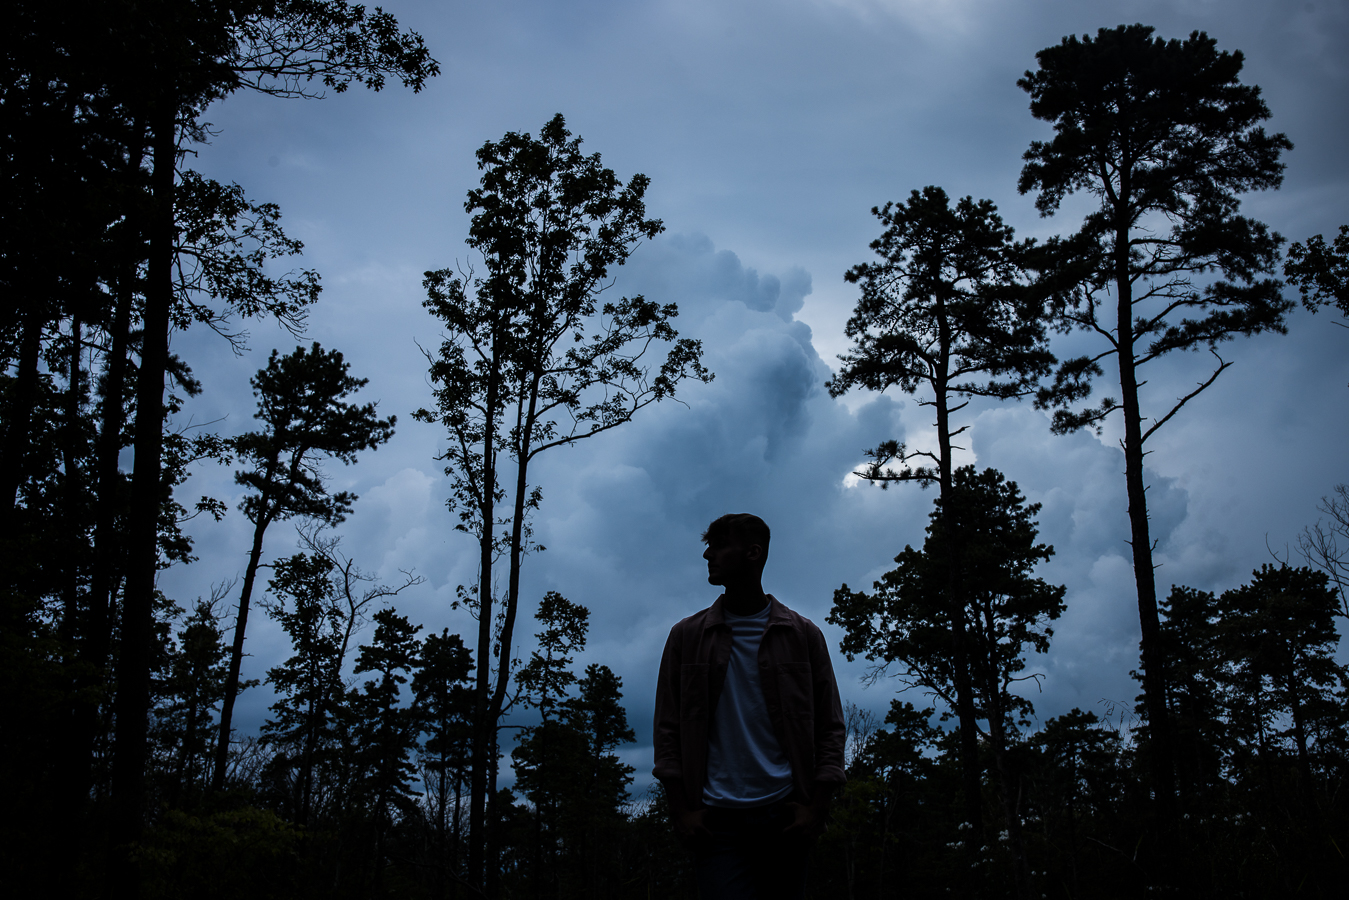 creative High school Senior Portrait Photographer, lisa rhinehart, captures this image of this senior as he stands amongst the trees as a storm rolls in behind him during this outdoor senior portrait session